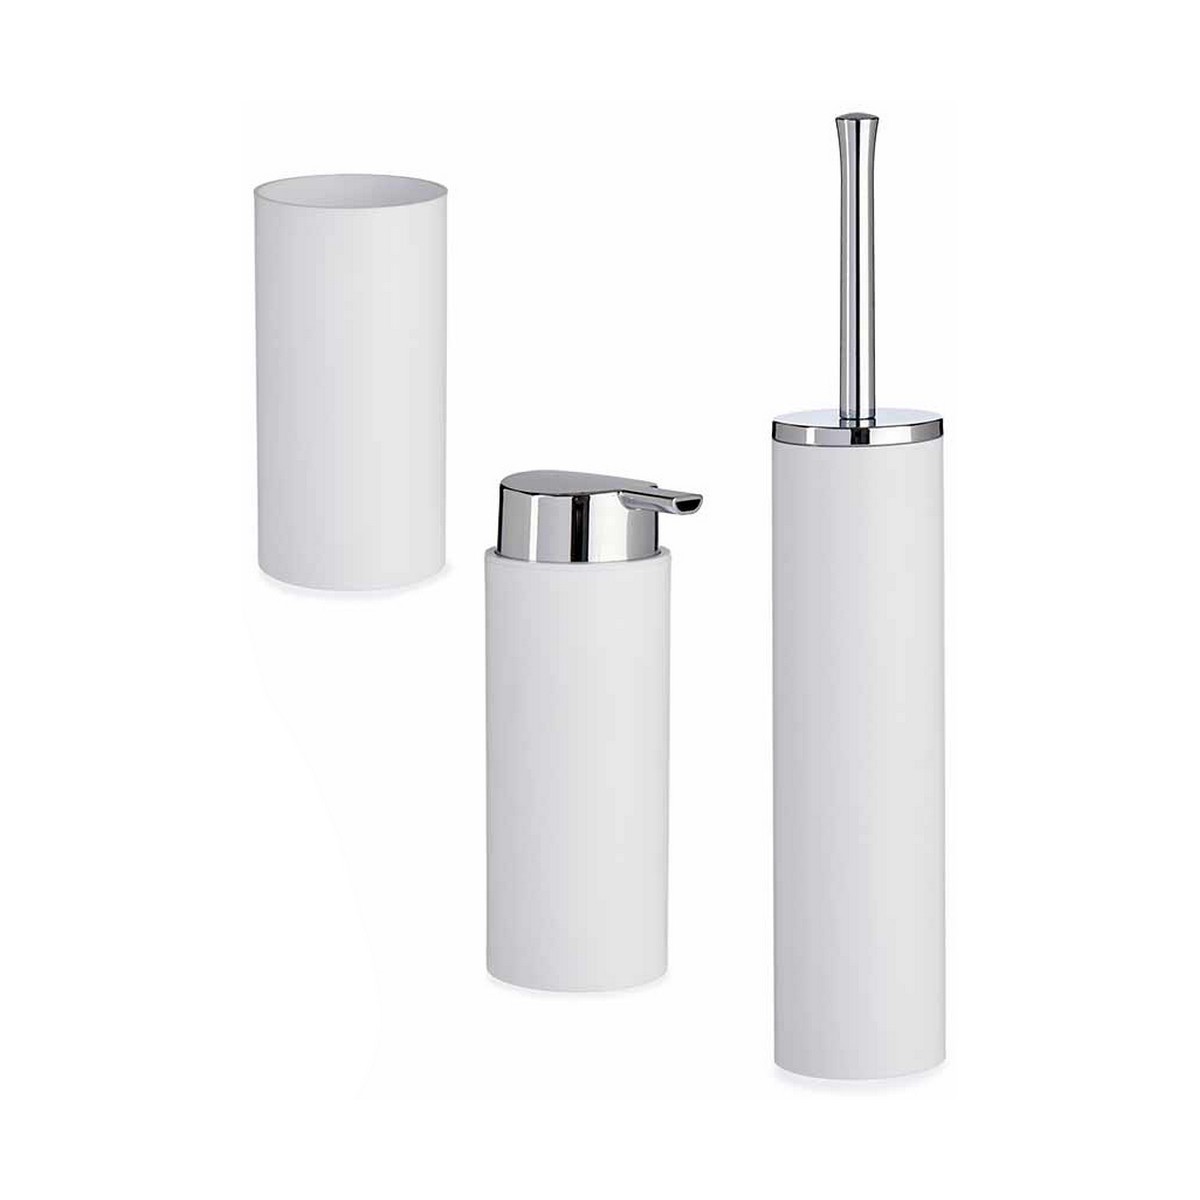 Bath Set White 3 Pieces Plastic - best prices in Albania and fast ...